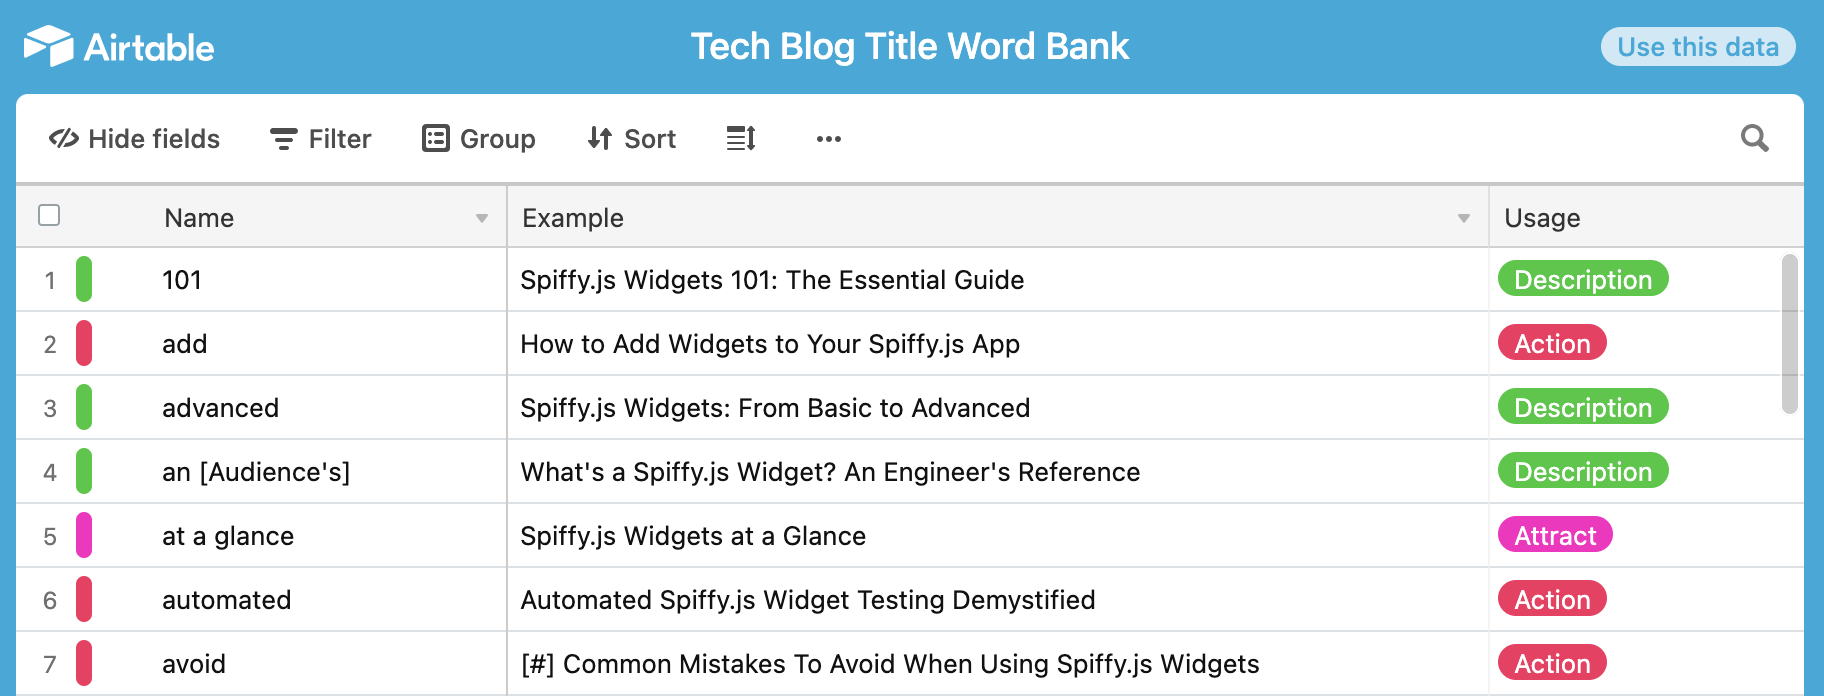 A screenshot of the Airtable containing the tech blog post word bank